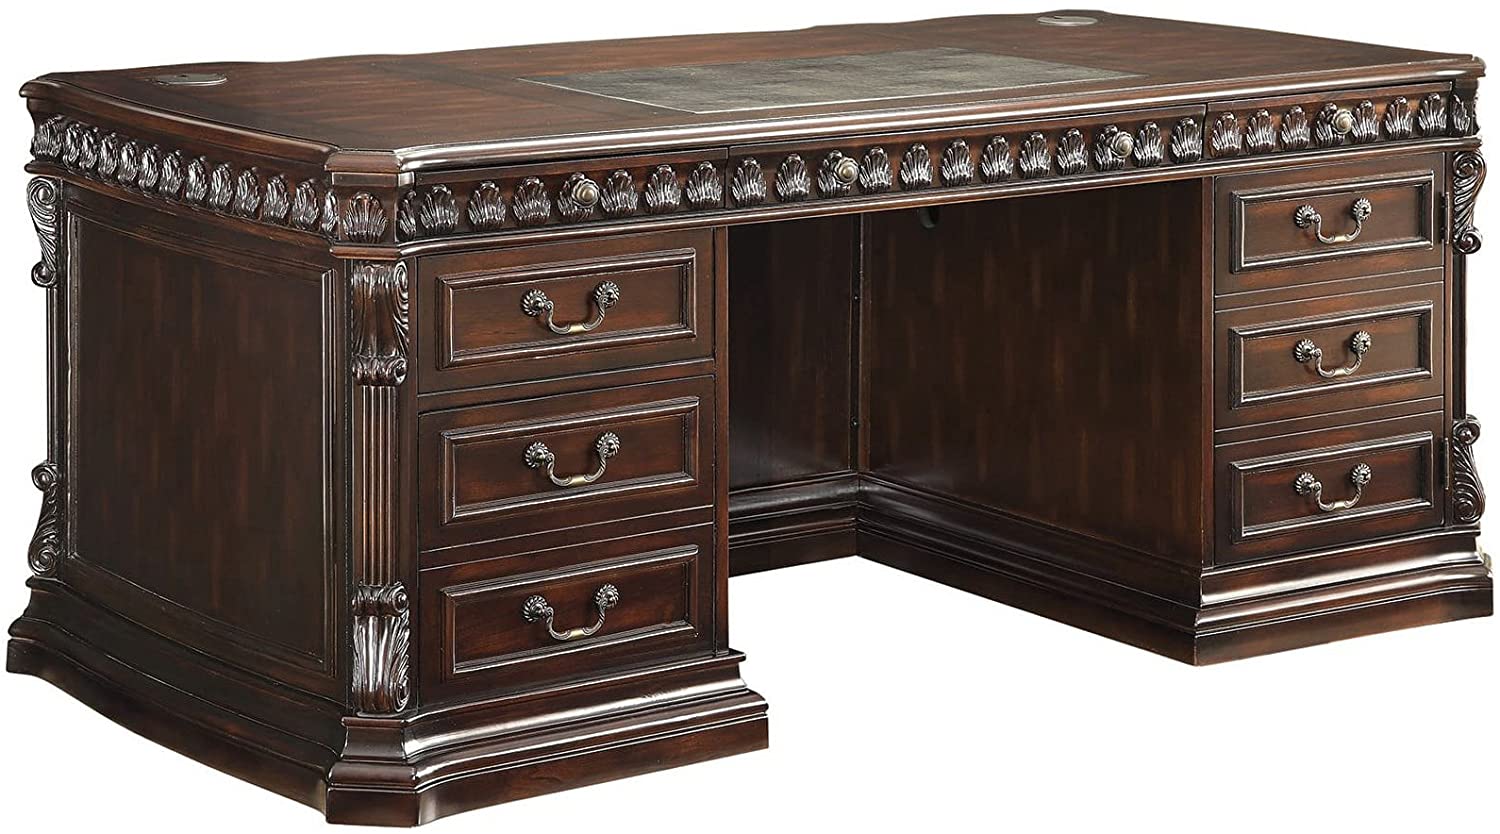 Tucker Double Pedestal Executive Desk with Leather Insert Top Rich Brown